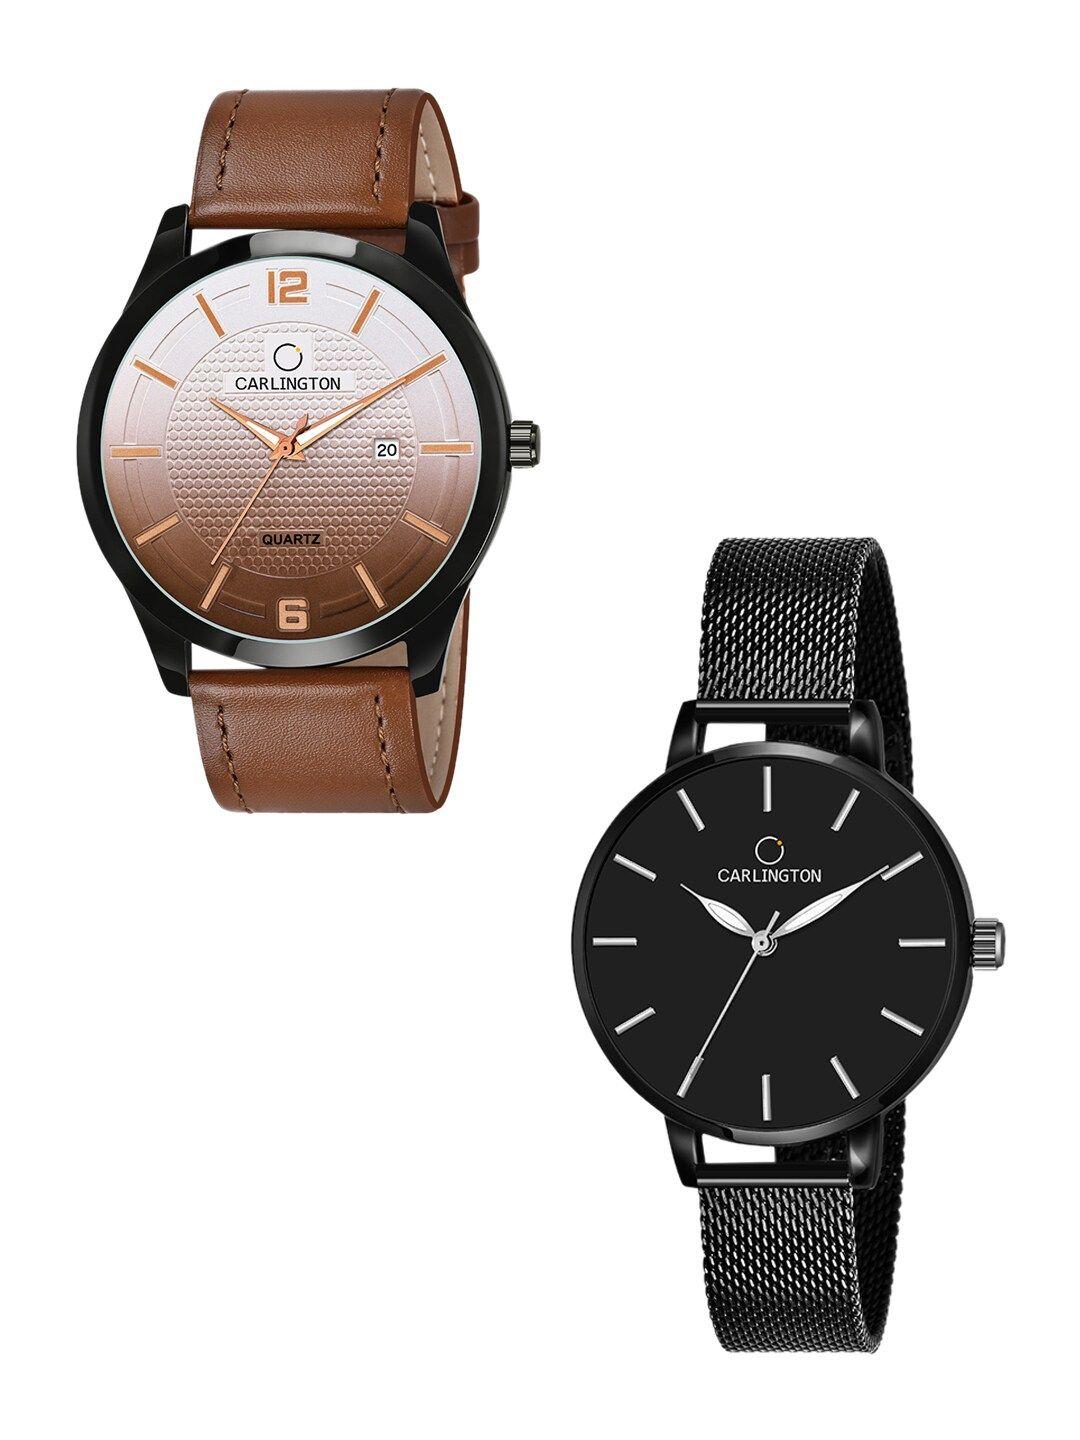 carlington-his-&-her-tan-leather-straps-analogue-watch-combo-ct1010-tan